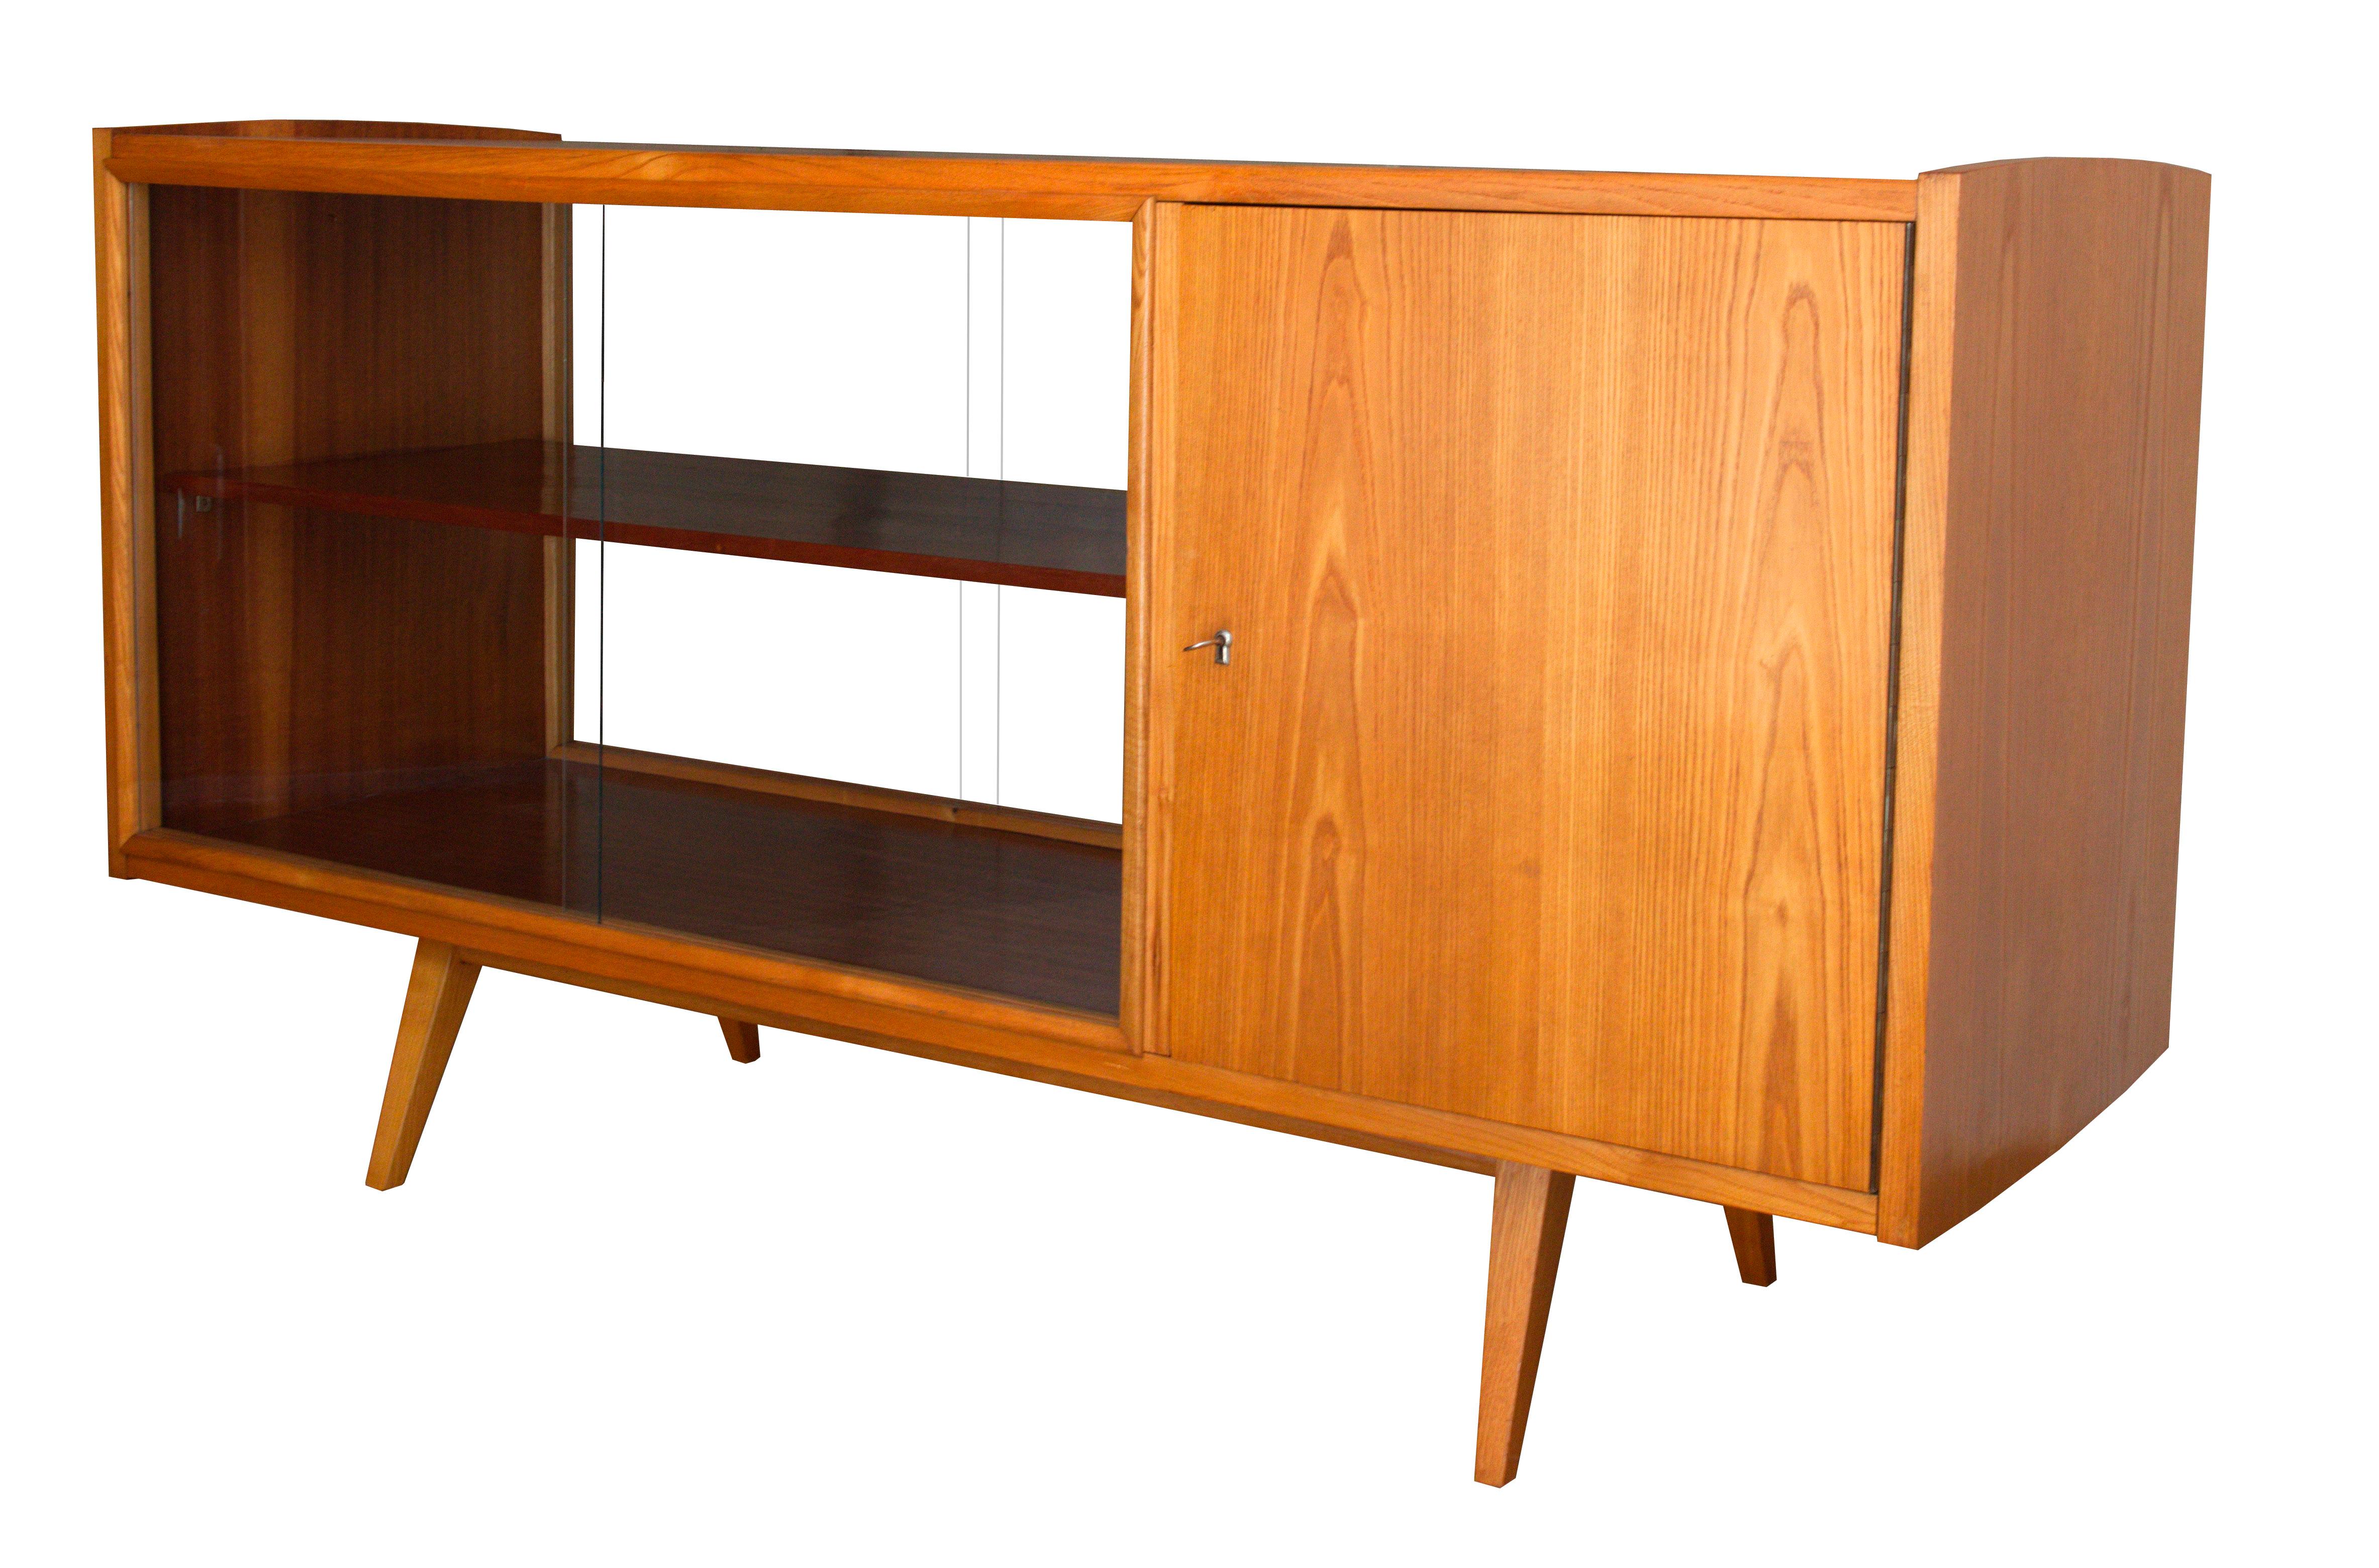 This midcentury sideboard was designed by the legendary Czech furniture designer Frantisek Jirak, and was manufactured in 1960s Czechoslovakia. This sideboard has got sliding glass doors on both sides and therefore offers more flexible options for